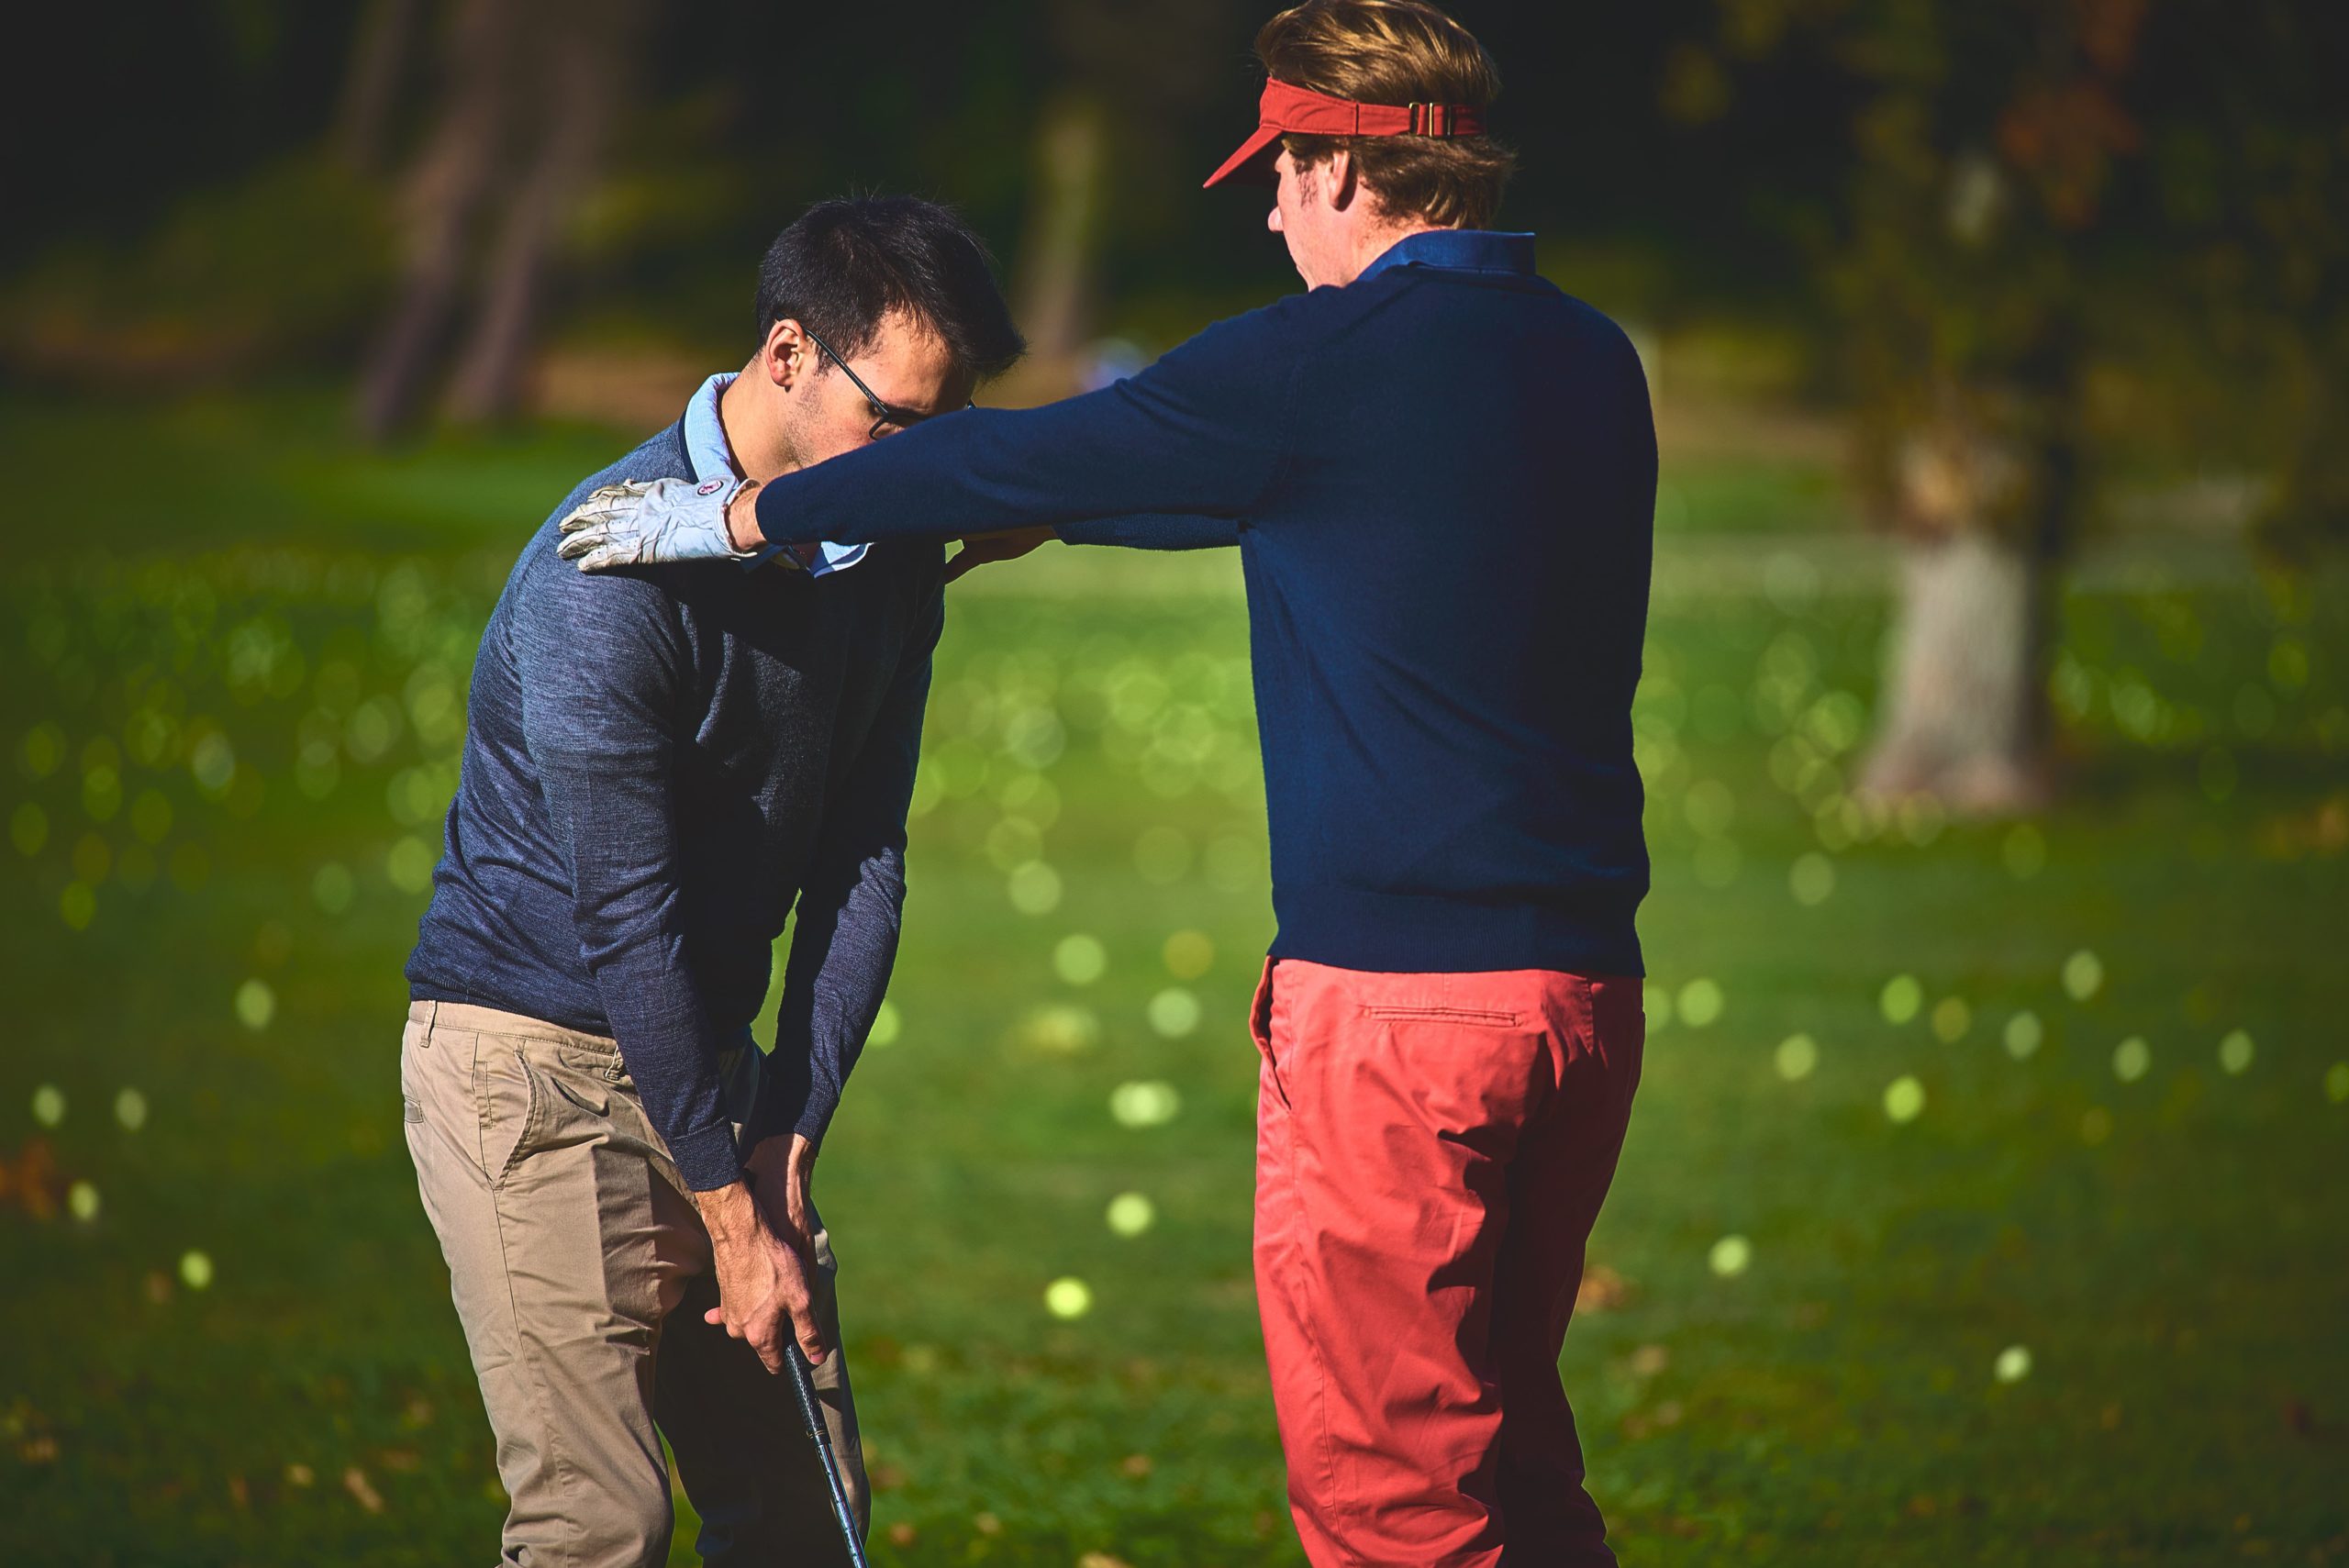 Cours de golf individuel, Resonance Golf Collection